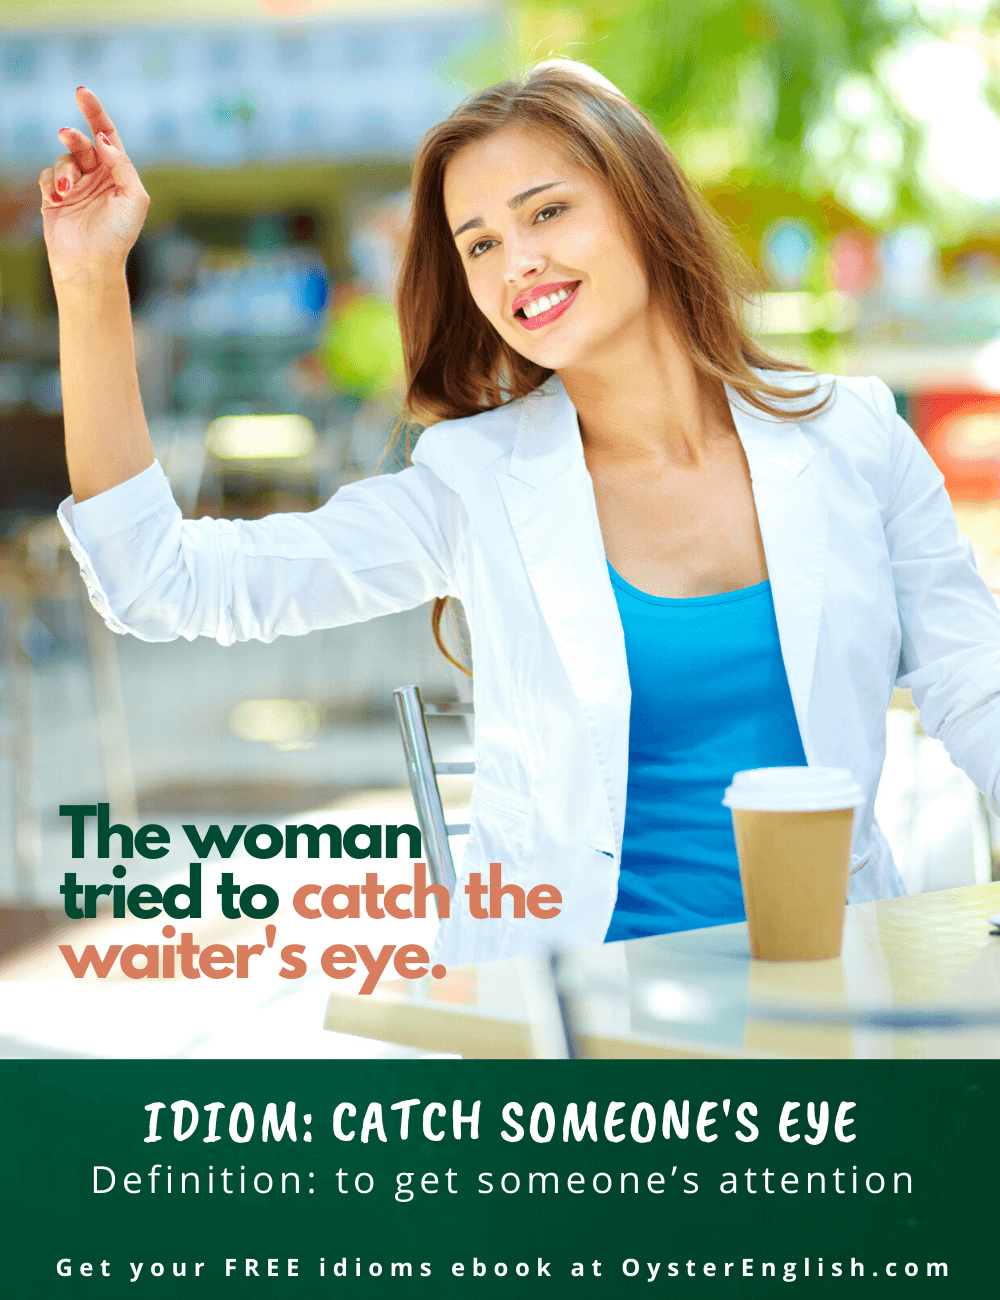 Picture of a woman at an outdoor cafe who is holding up her hand to try to get the waiter's attention. Caption: the woman tried to catch the waiter's eye.